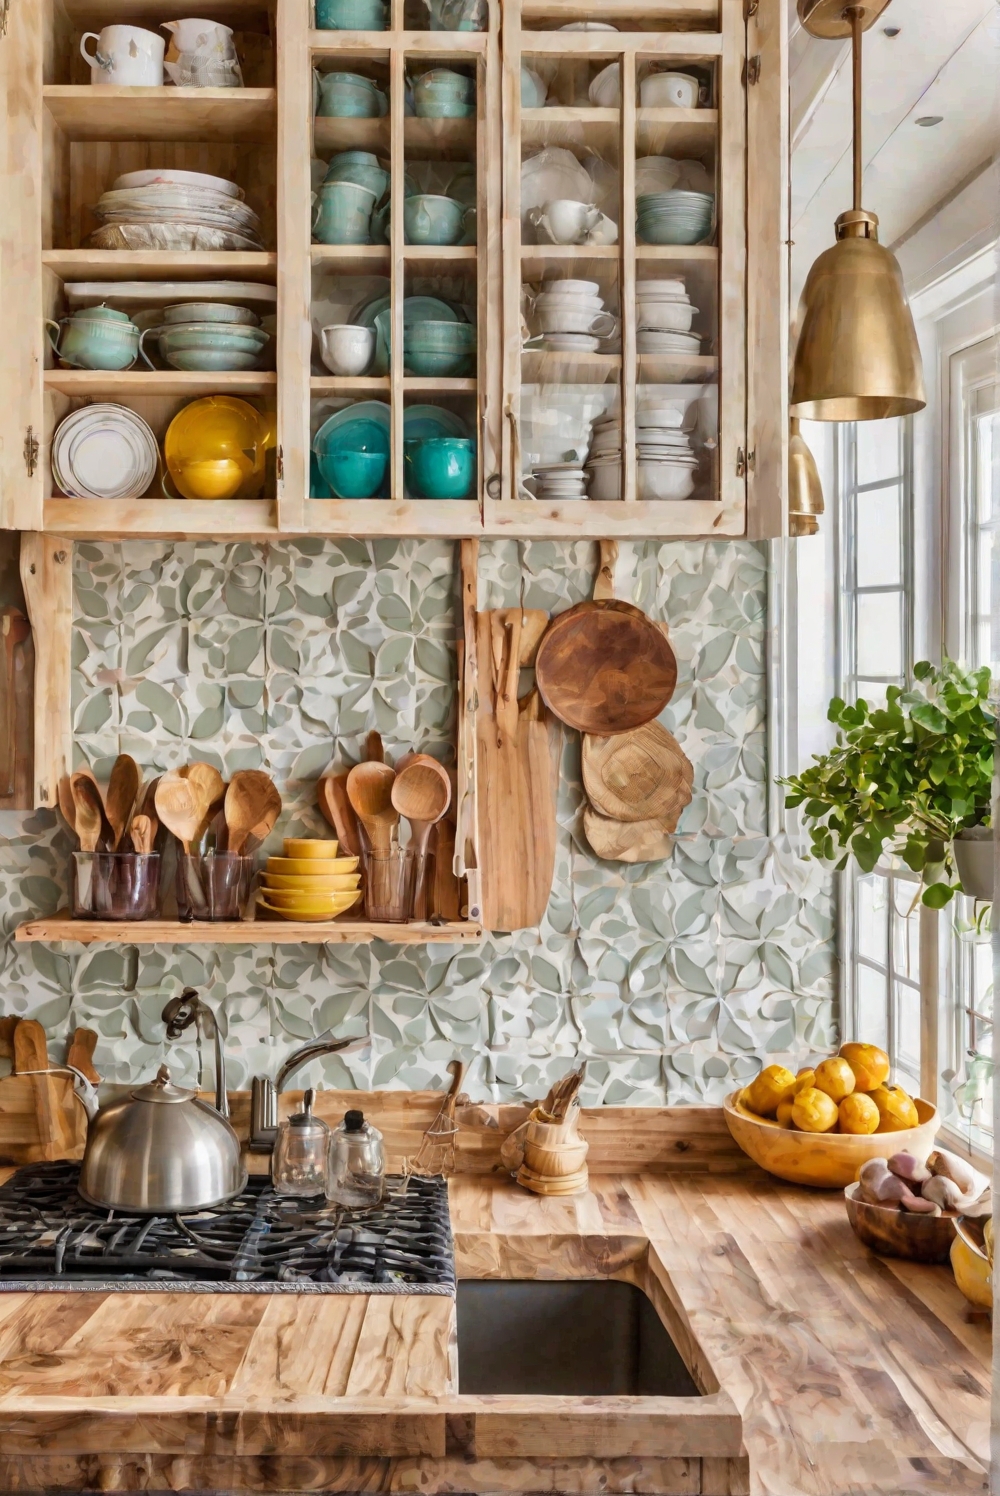 How to Choose the Right Color Palette for Your Kitchen Decor (That You’ll Love)